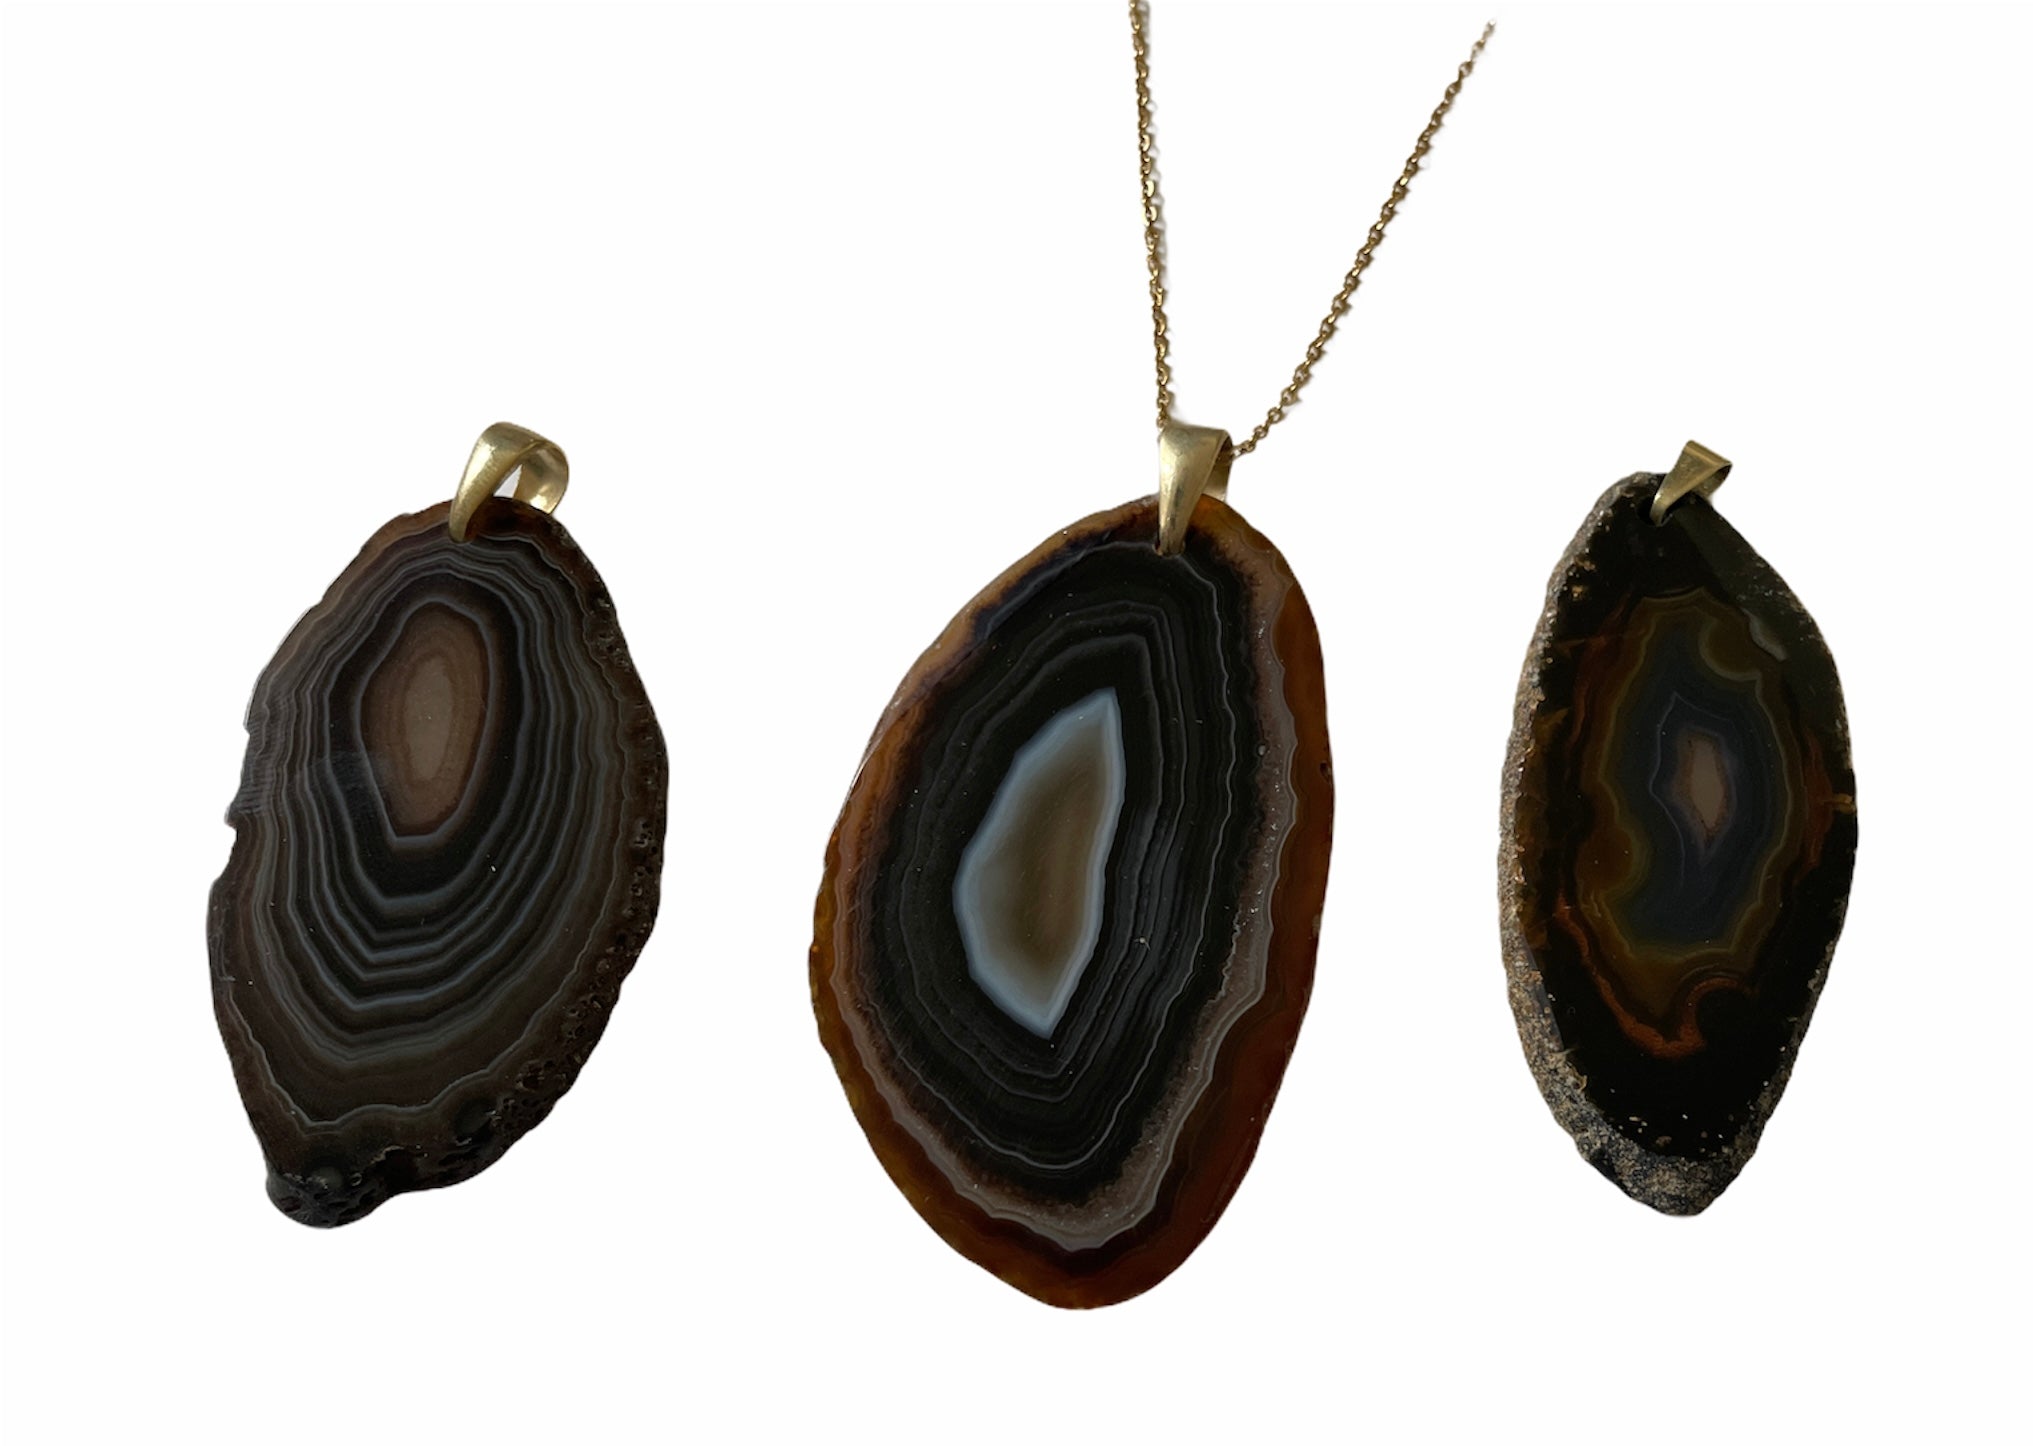 Necklace Agate Dark Patterned Raw Edge